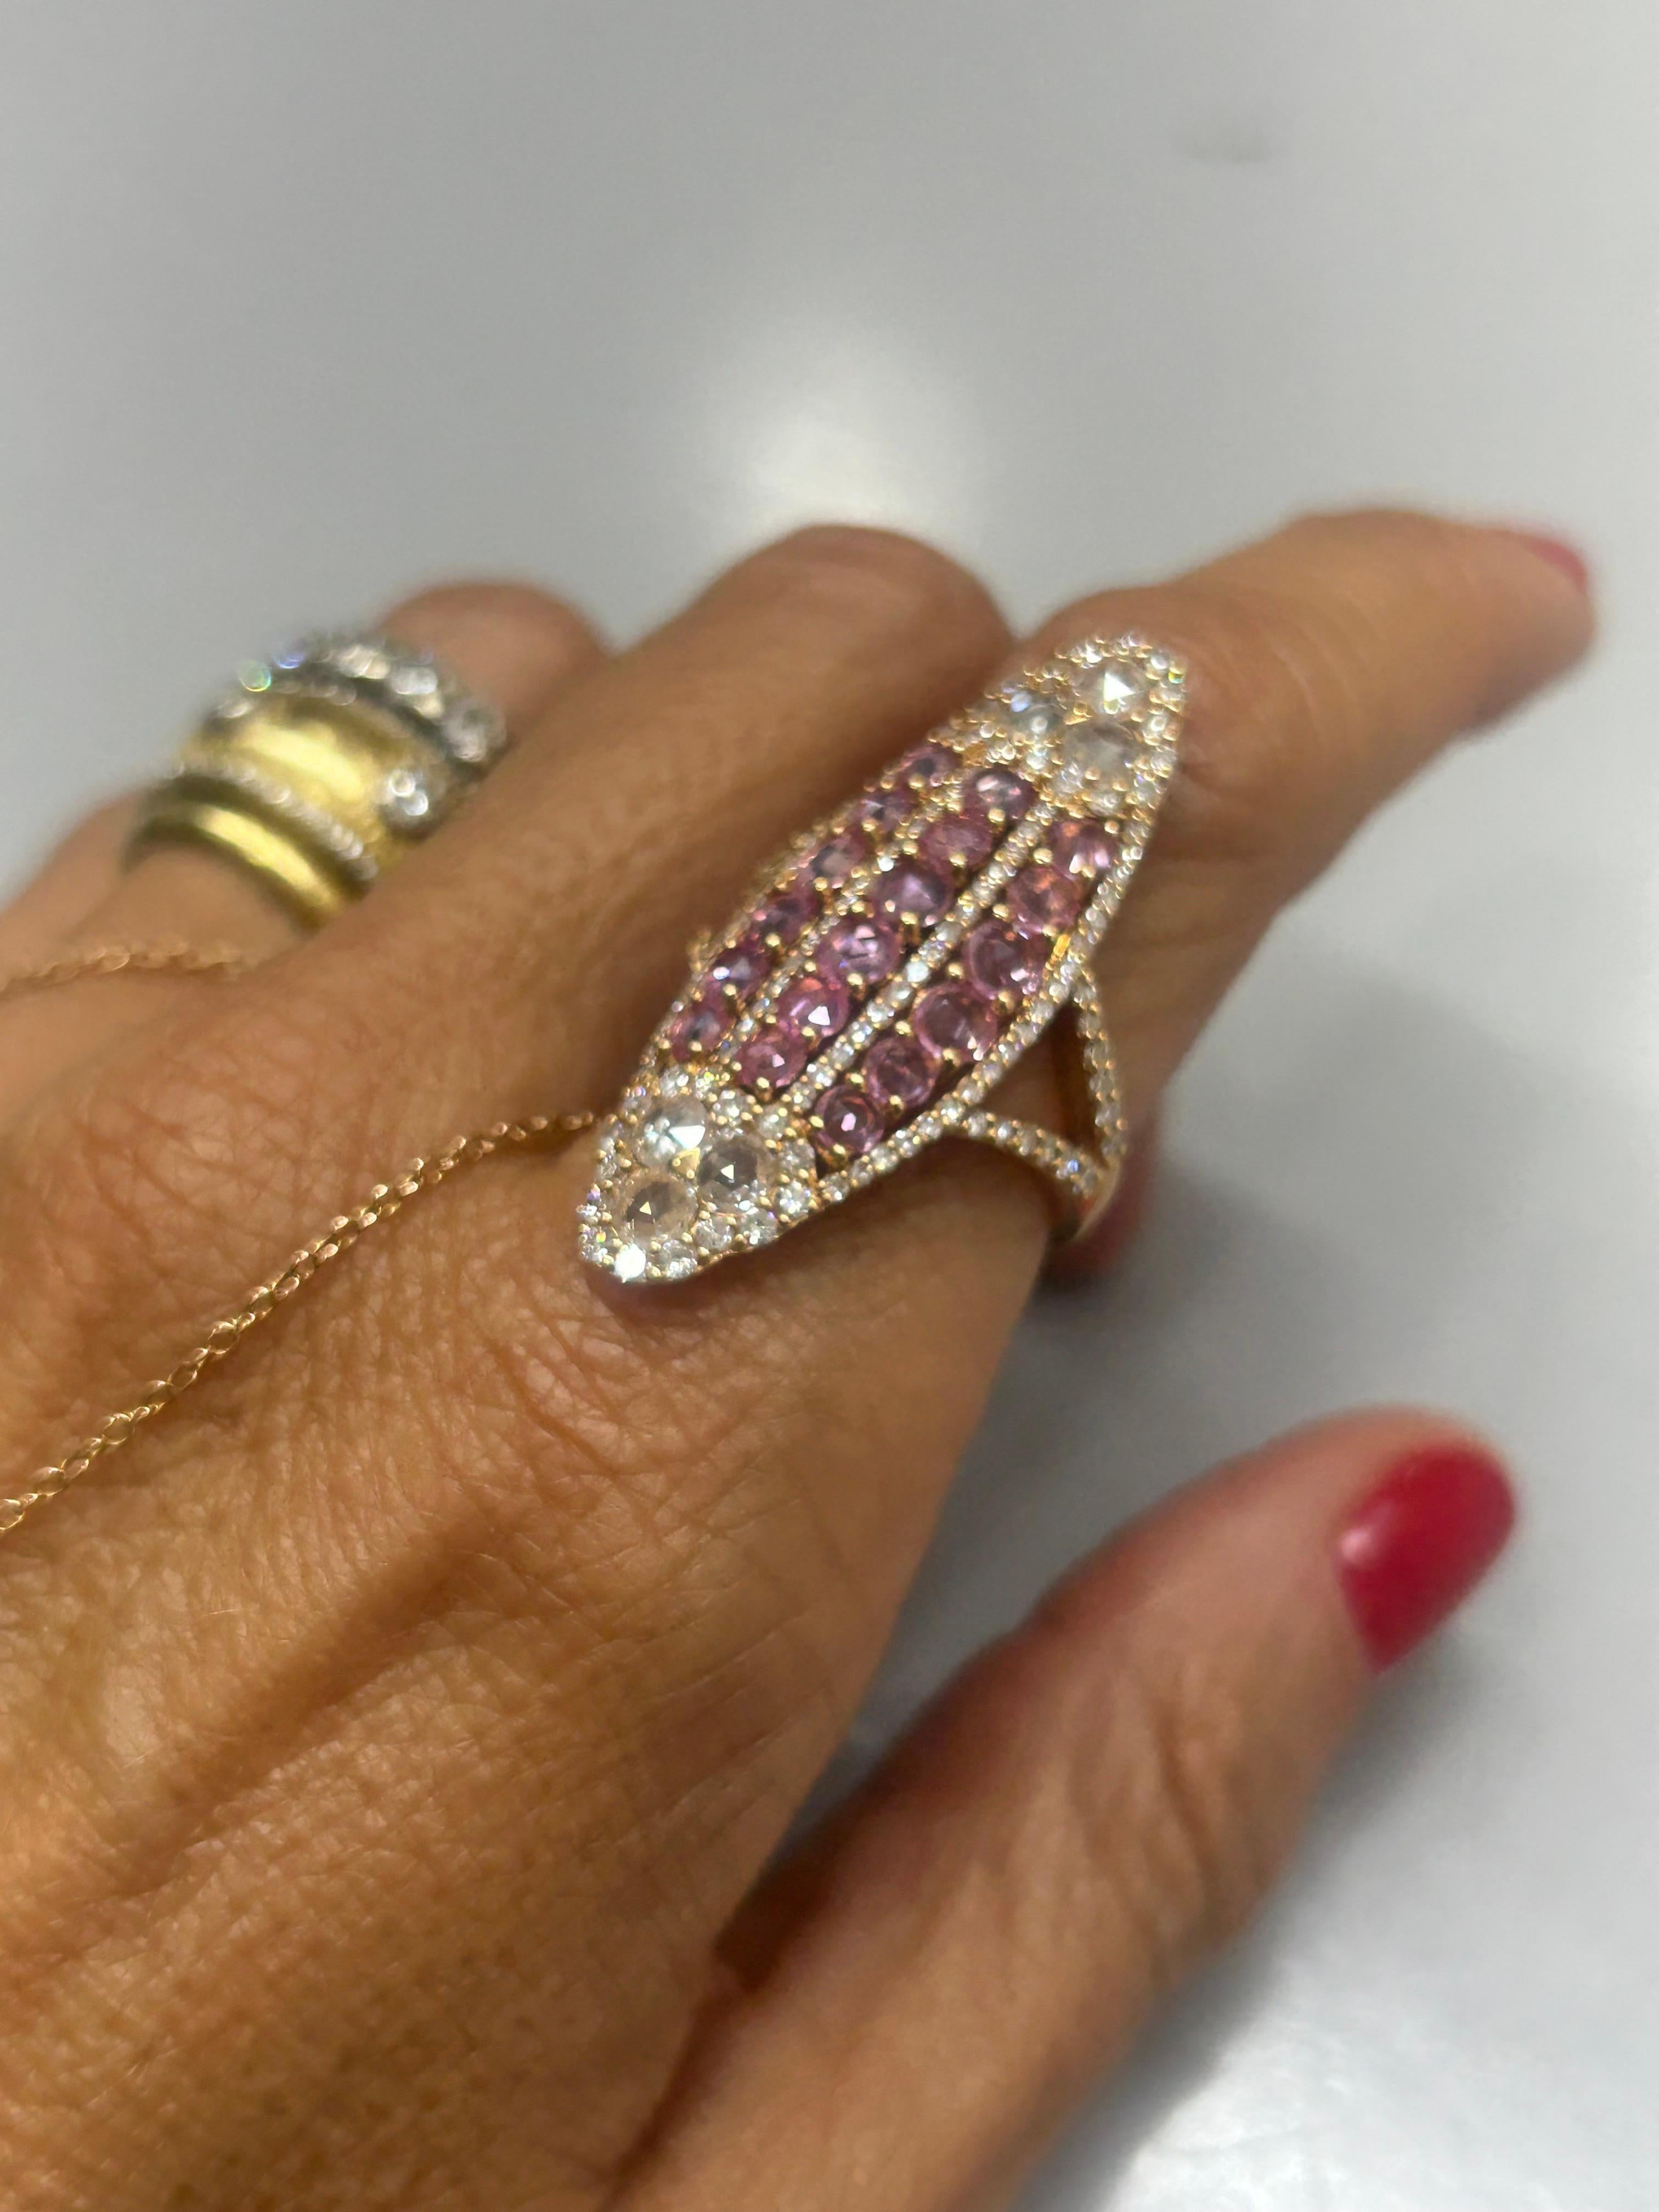 This magnificent CLIO cocktail ring is extremely versatile. You can wear it in a casual mode with jeans and a tshirt or it may be a head-turner ring at cocktails or galas. The rose-cut & brilliant diamonds are manually set following the expertise of